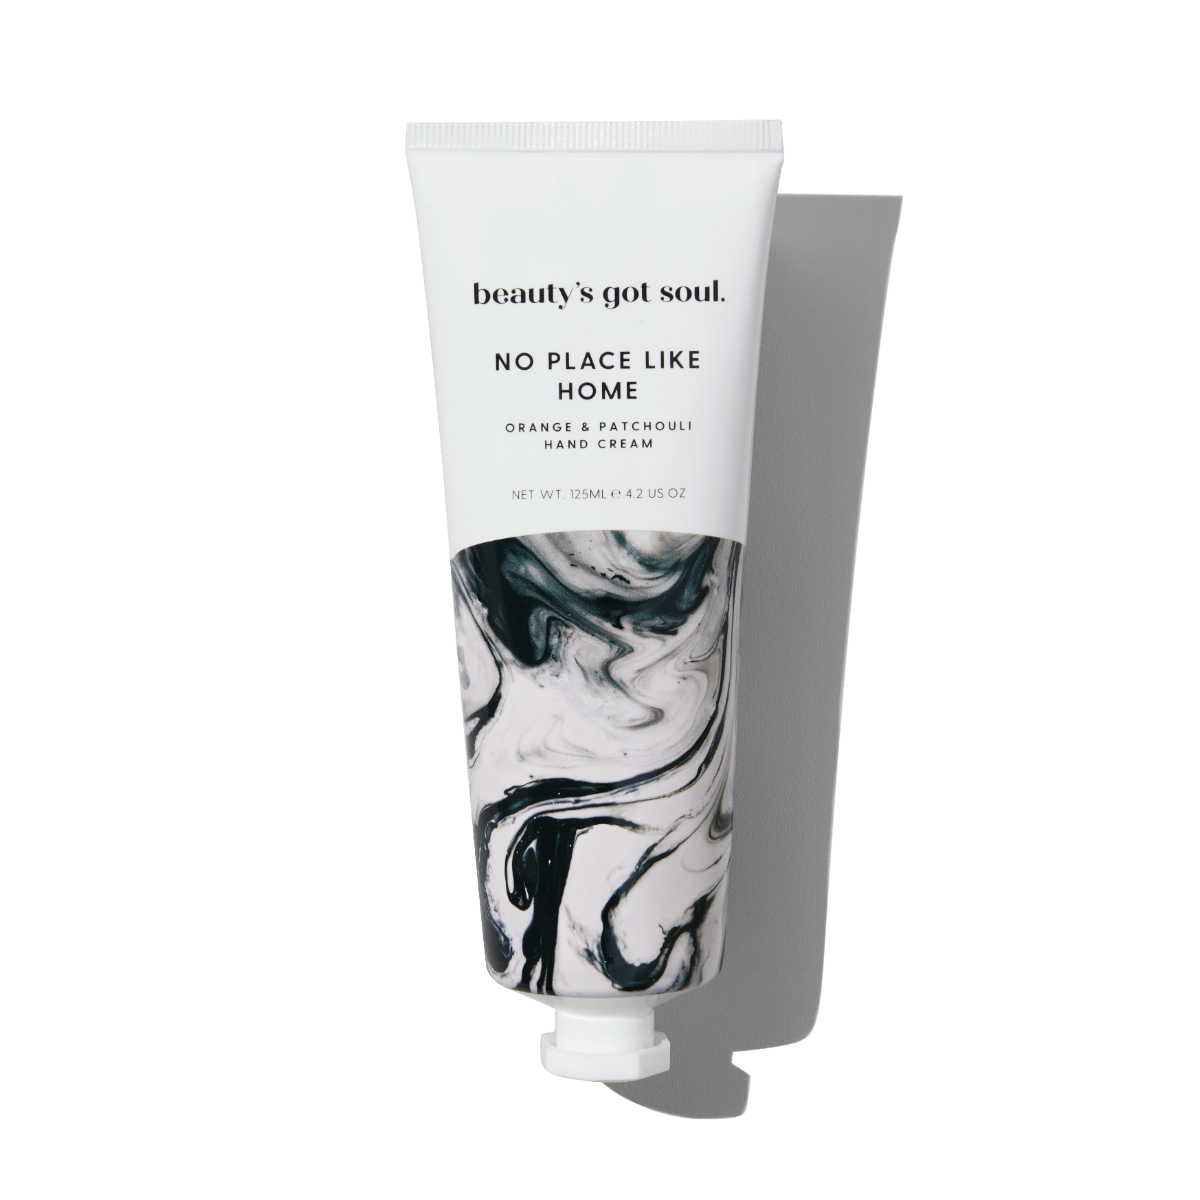 No Place Like Home Hand Cream Unboxed 125ml by beauty's got soul